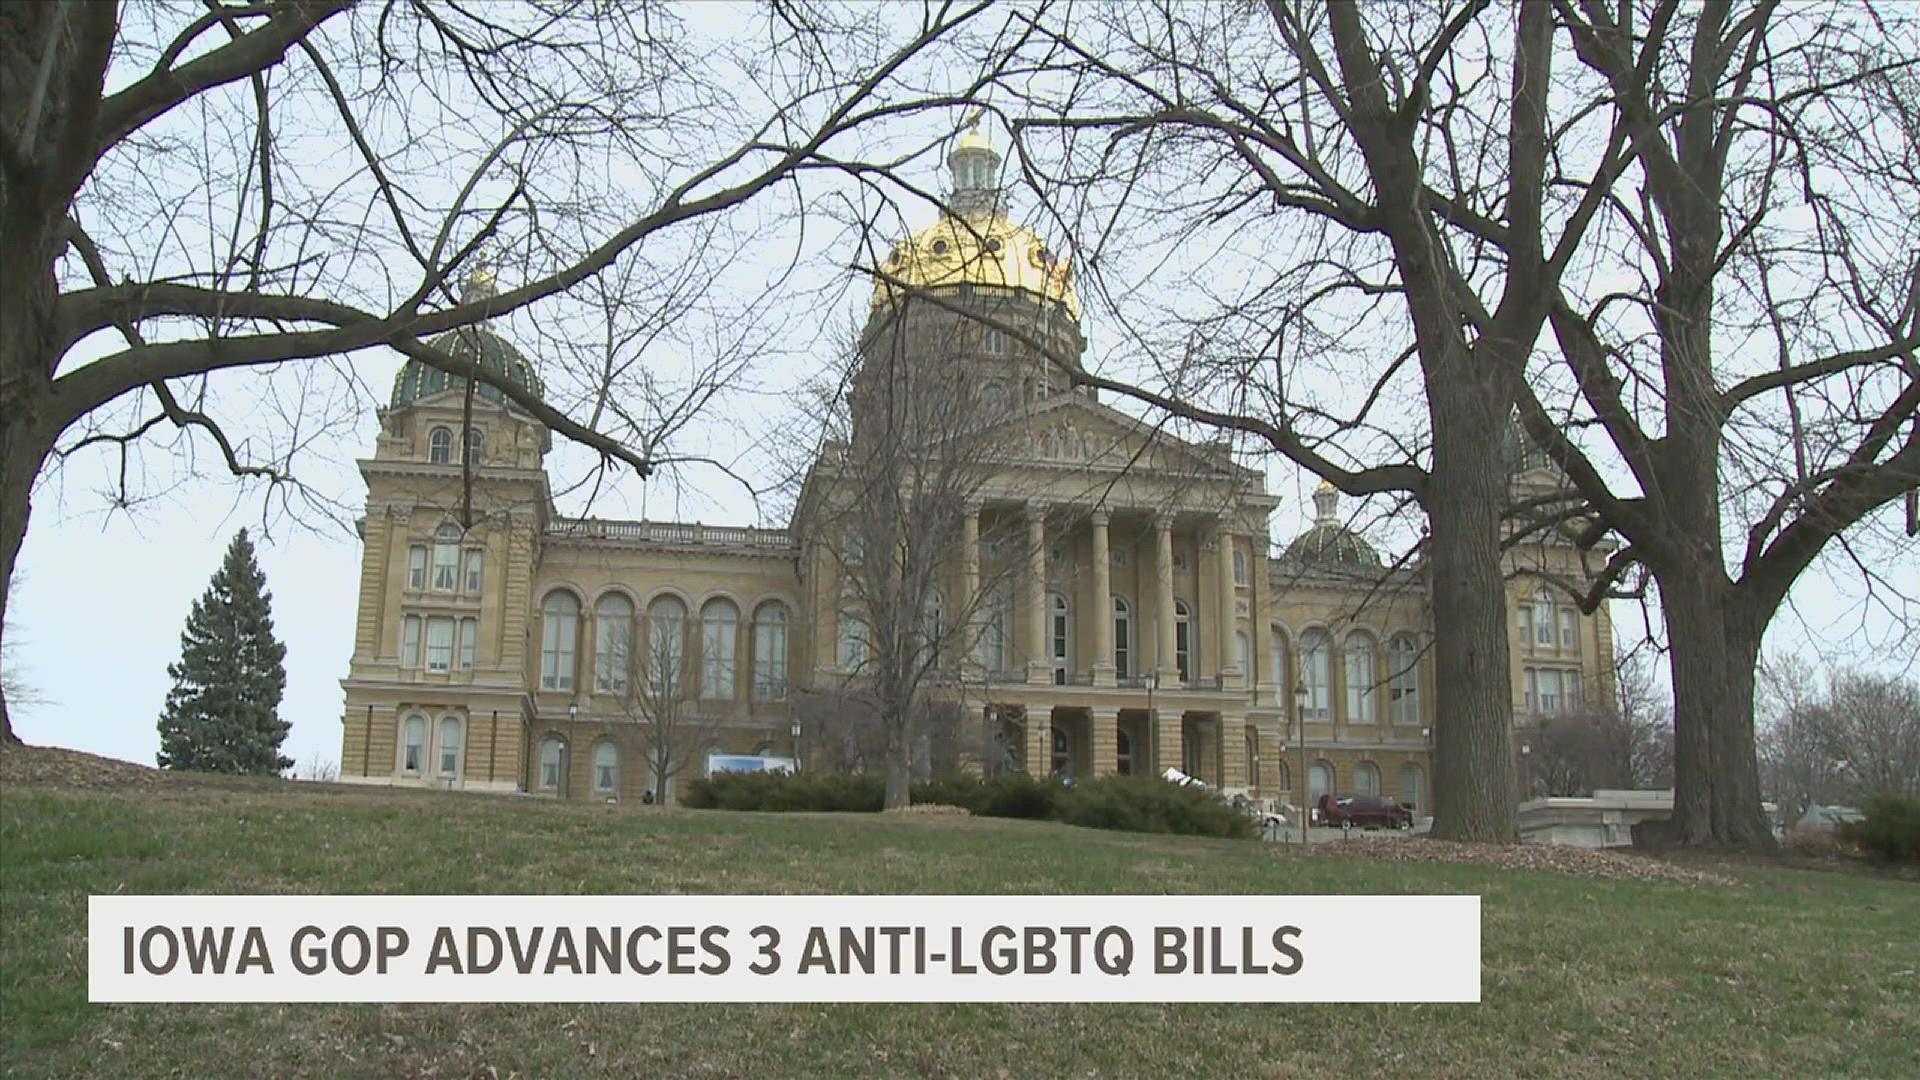 The bills would ban teaching on gender identity in K-8, force educators to report a student's gender identity to parents, and more measures condemned by activists.